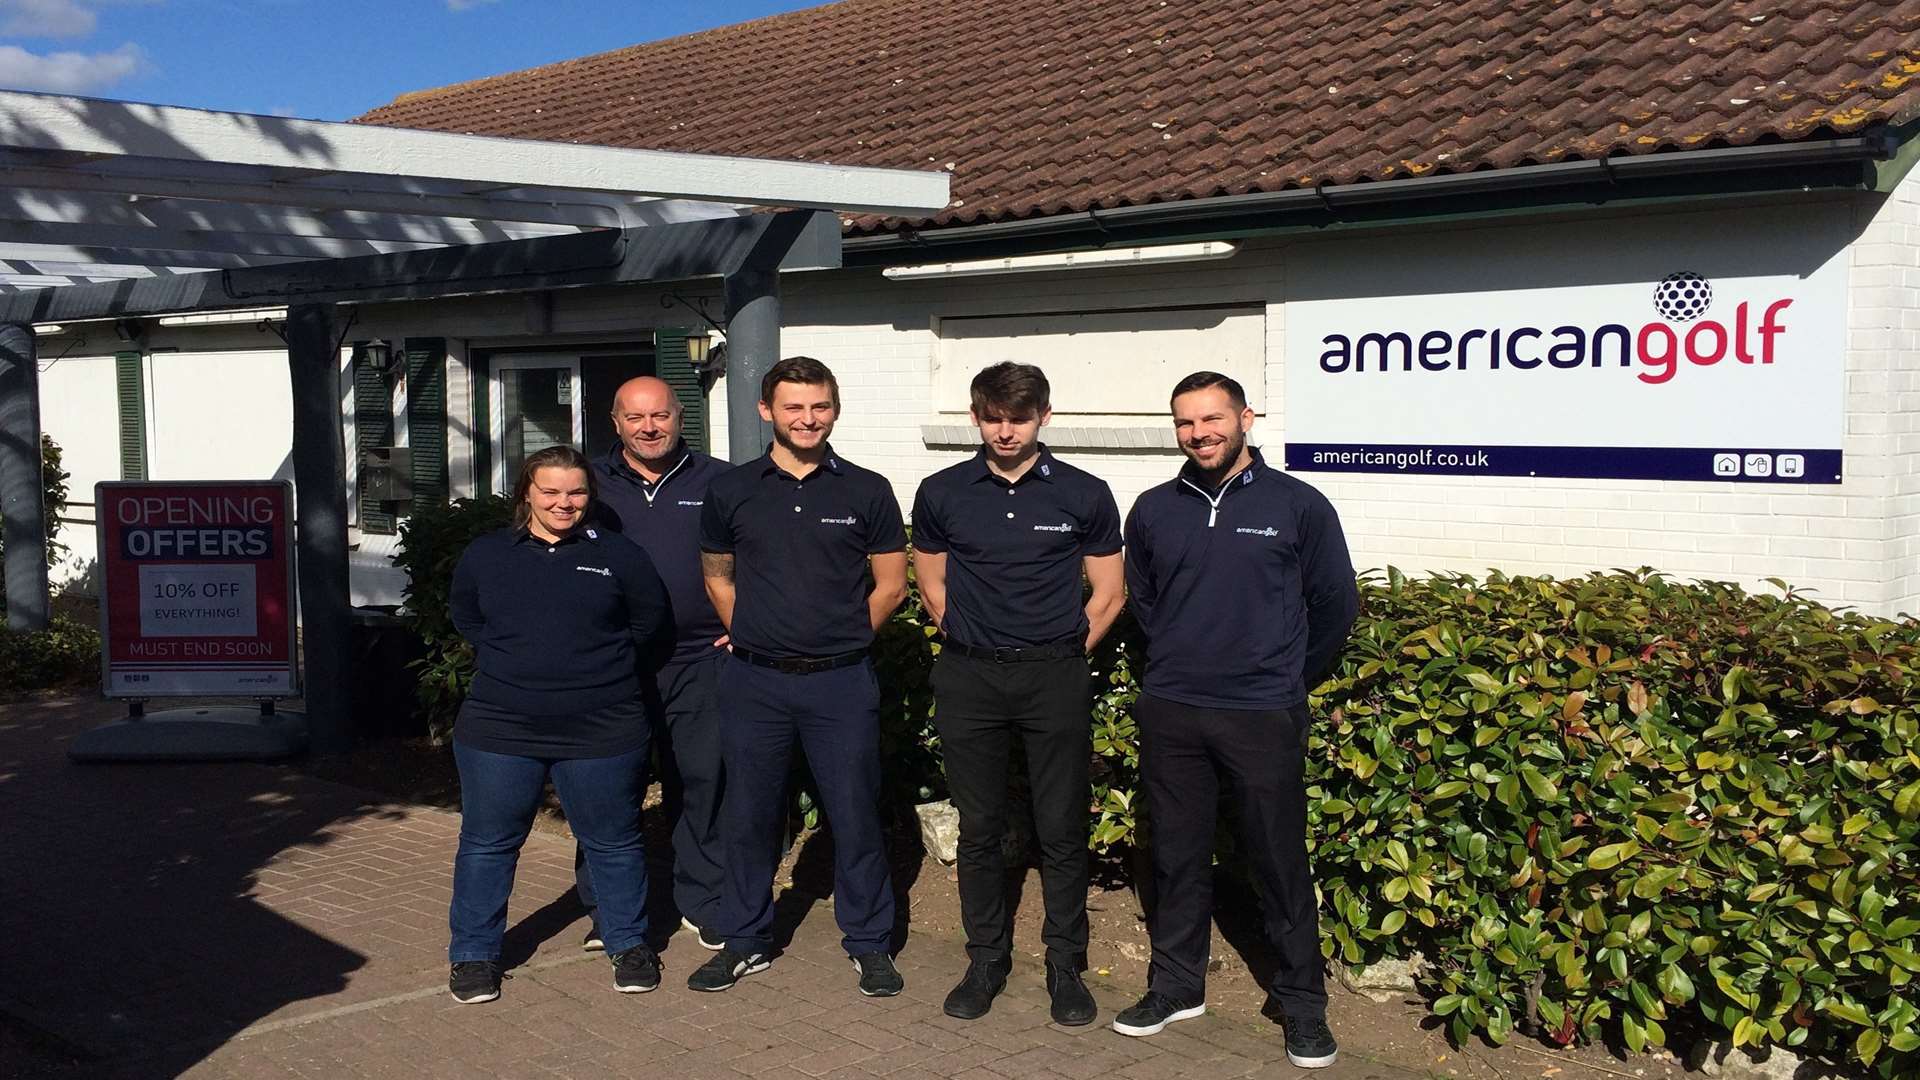 American Golf has taken over the shop at Gravesend Golf Centre and taken on staff, from left, Angela Lathey, Mark Taylor, Dan Fairbrass, Tom Probin and Austin Wedge